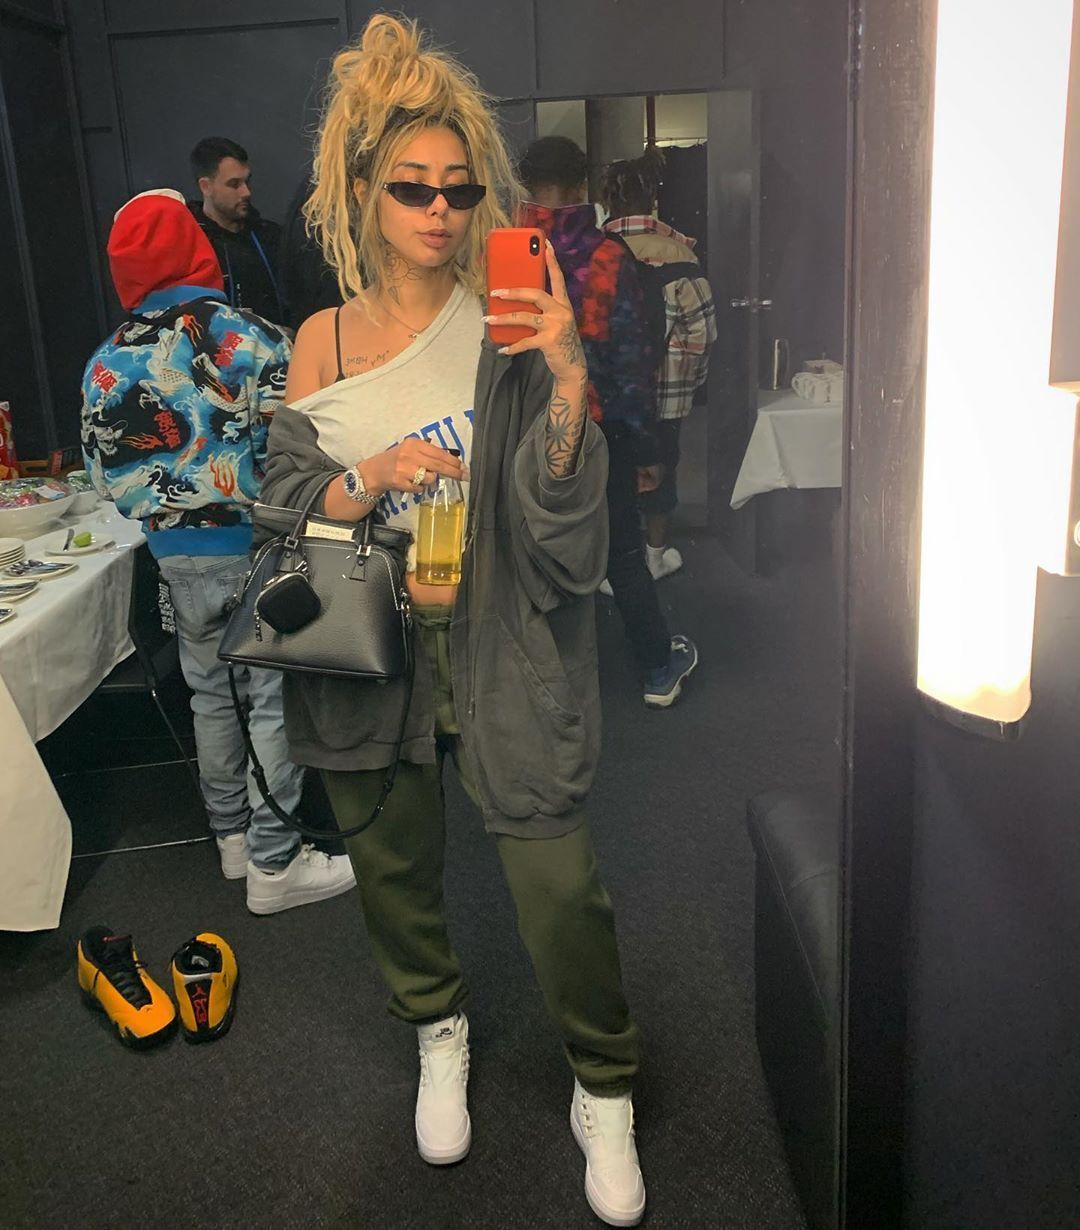 ally lotti on Instagram: “melbourne was lit”. Celebrity outfits